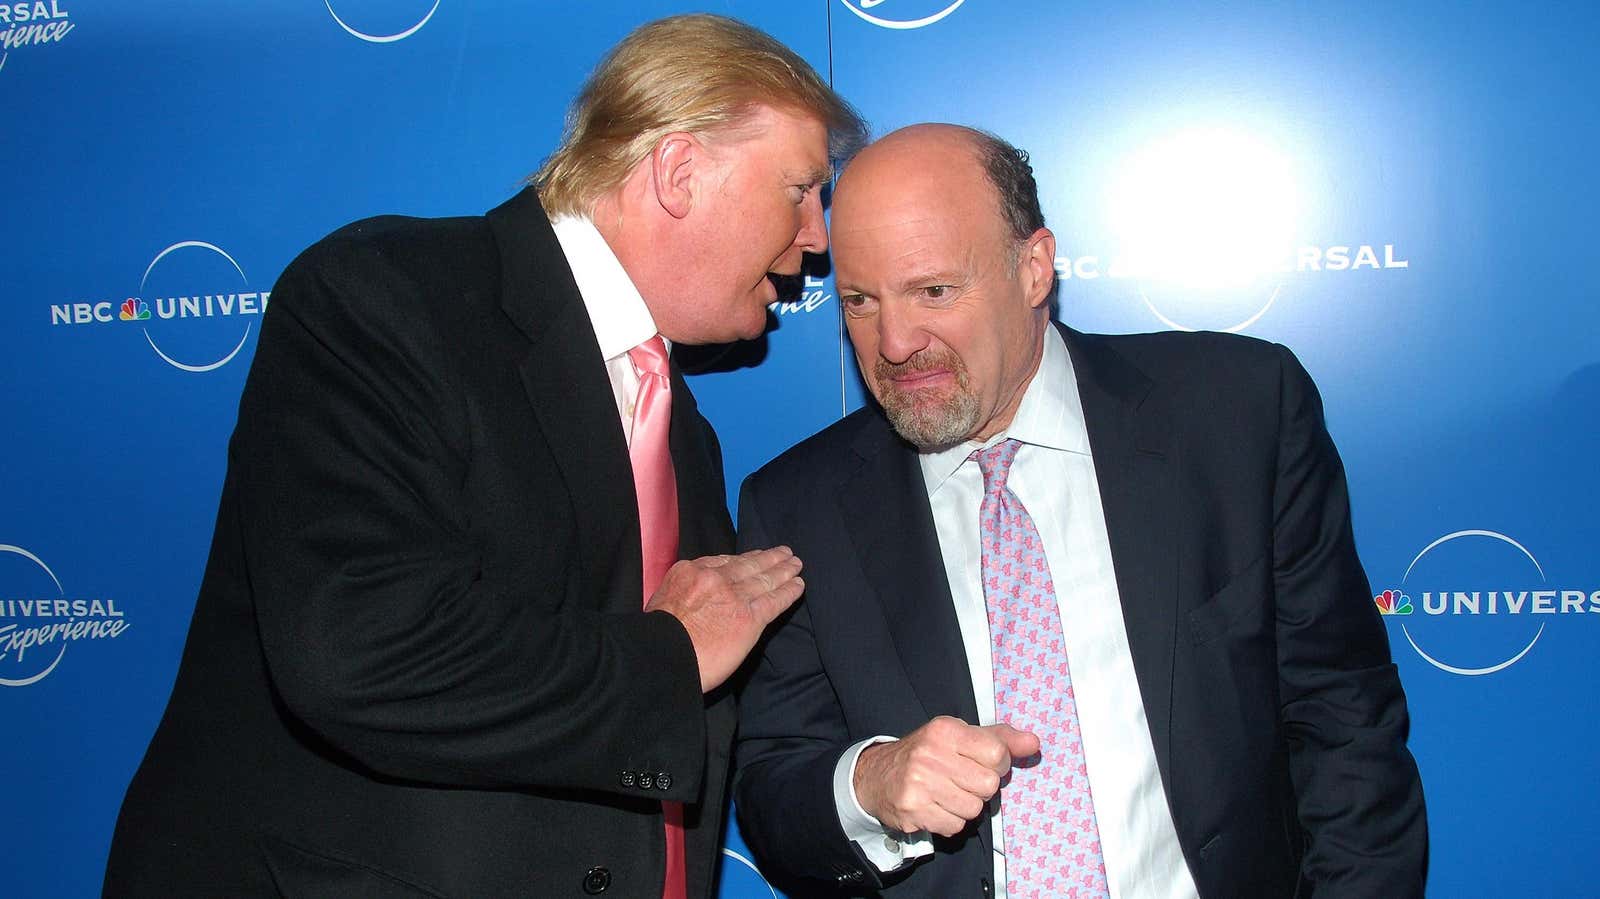 File photo of Donald Trump and Jim Cramer at Rockefeller Center on May 12, 2008 in New York City.